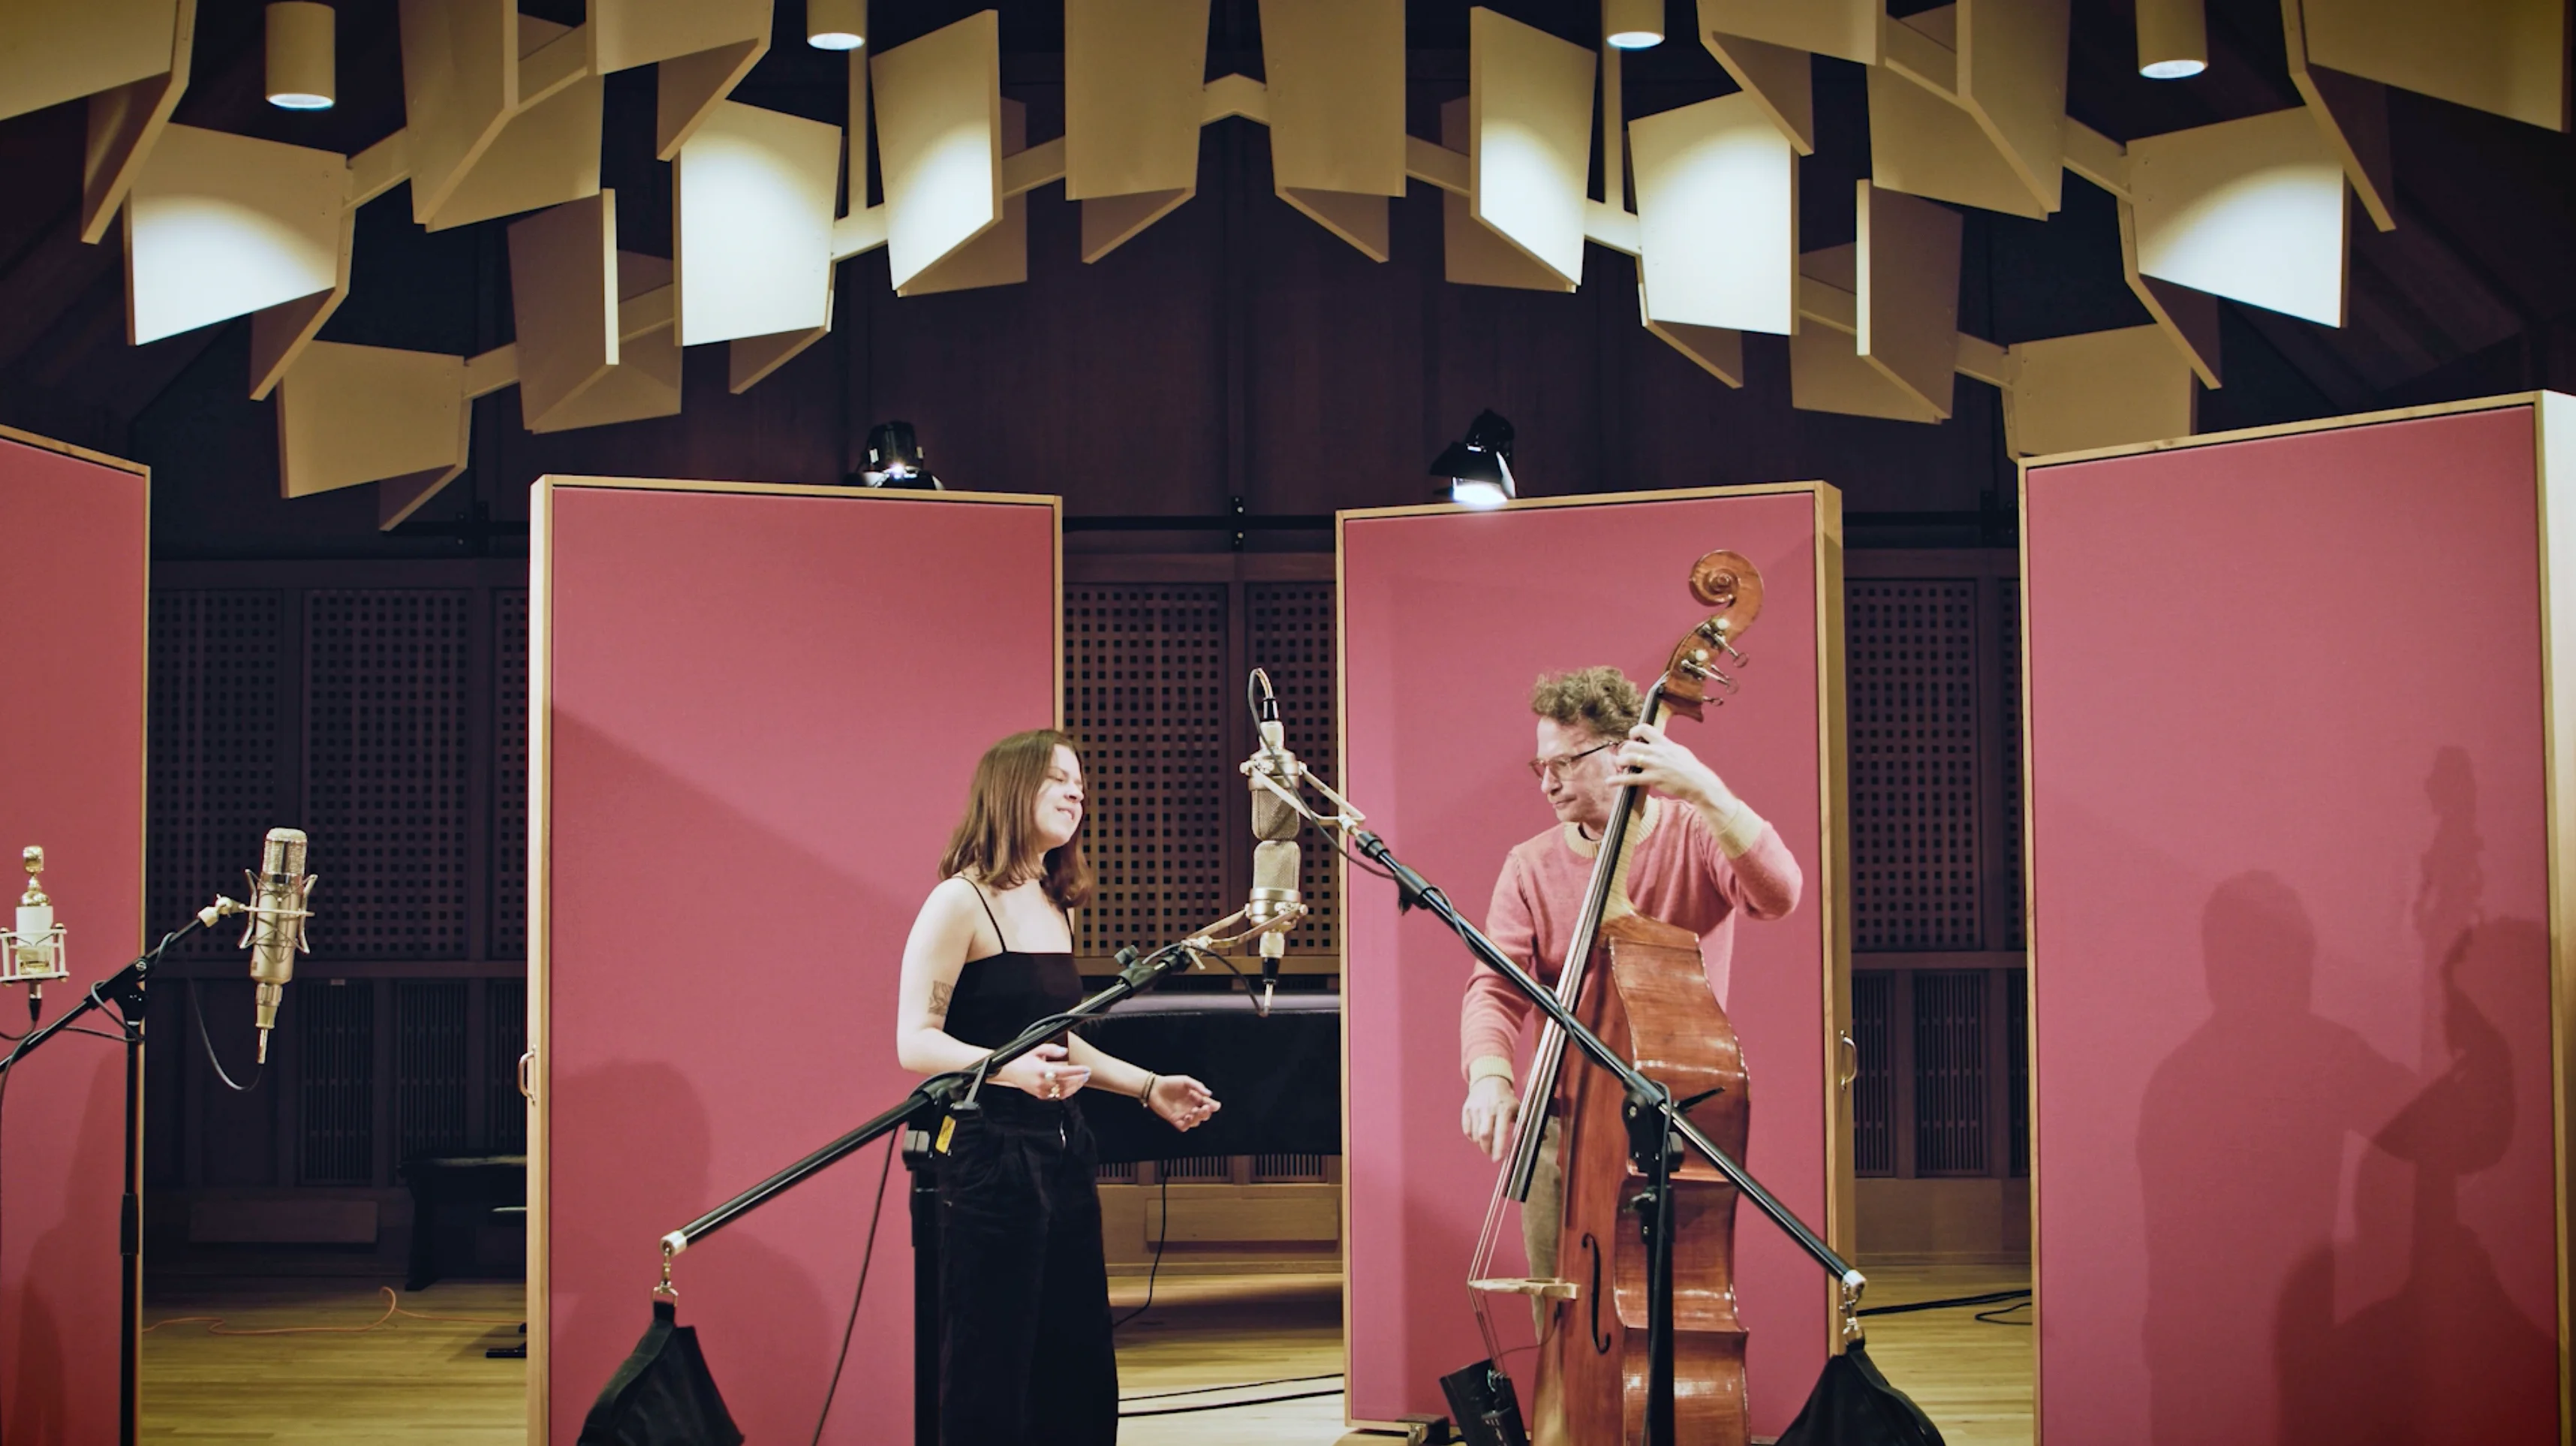 SIDE BY SIDE: STUDENTS AND TEACHERS OF THE JAZZ INSTITUTE on Vimeo